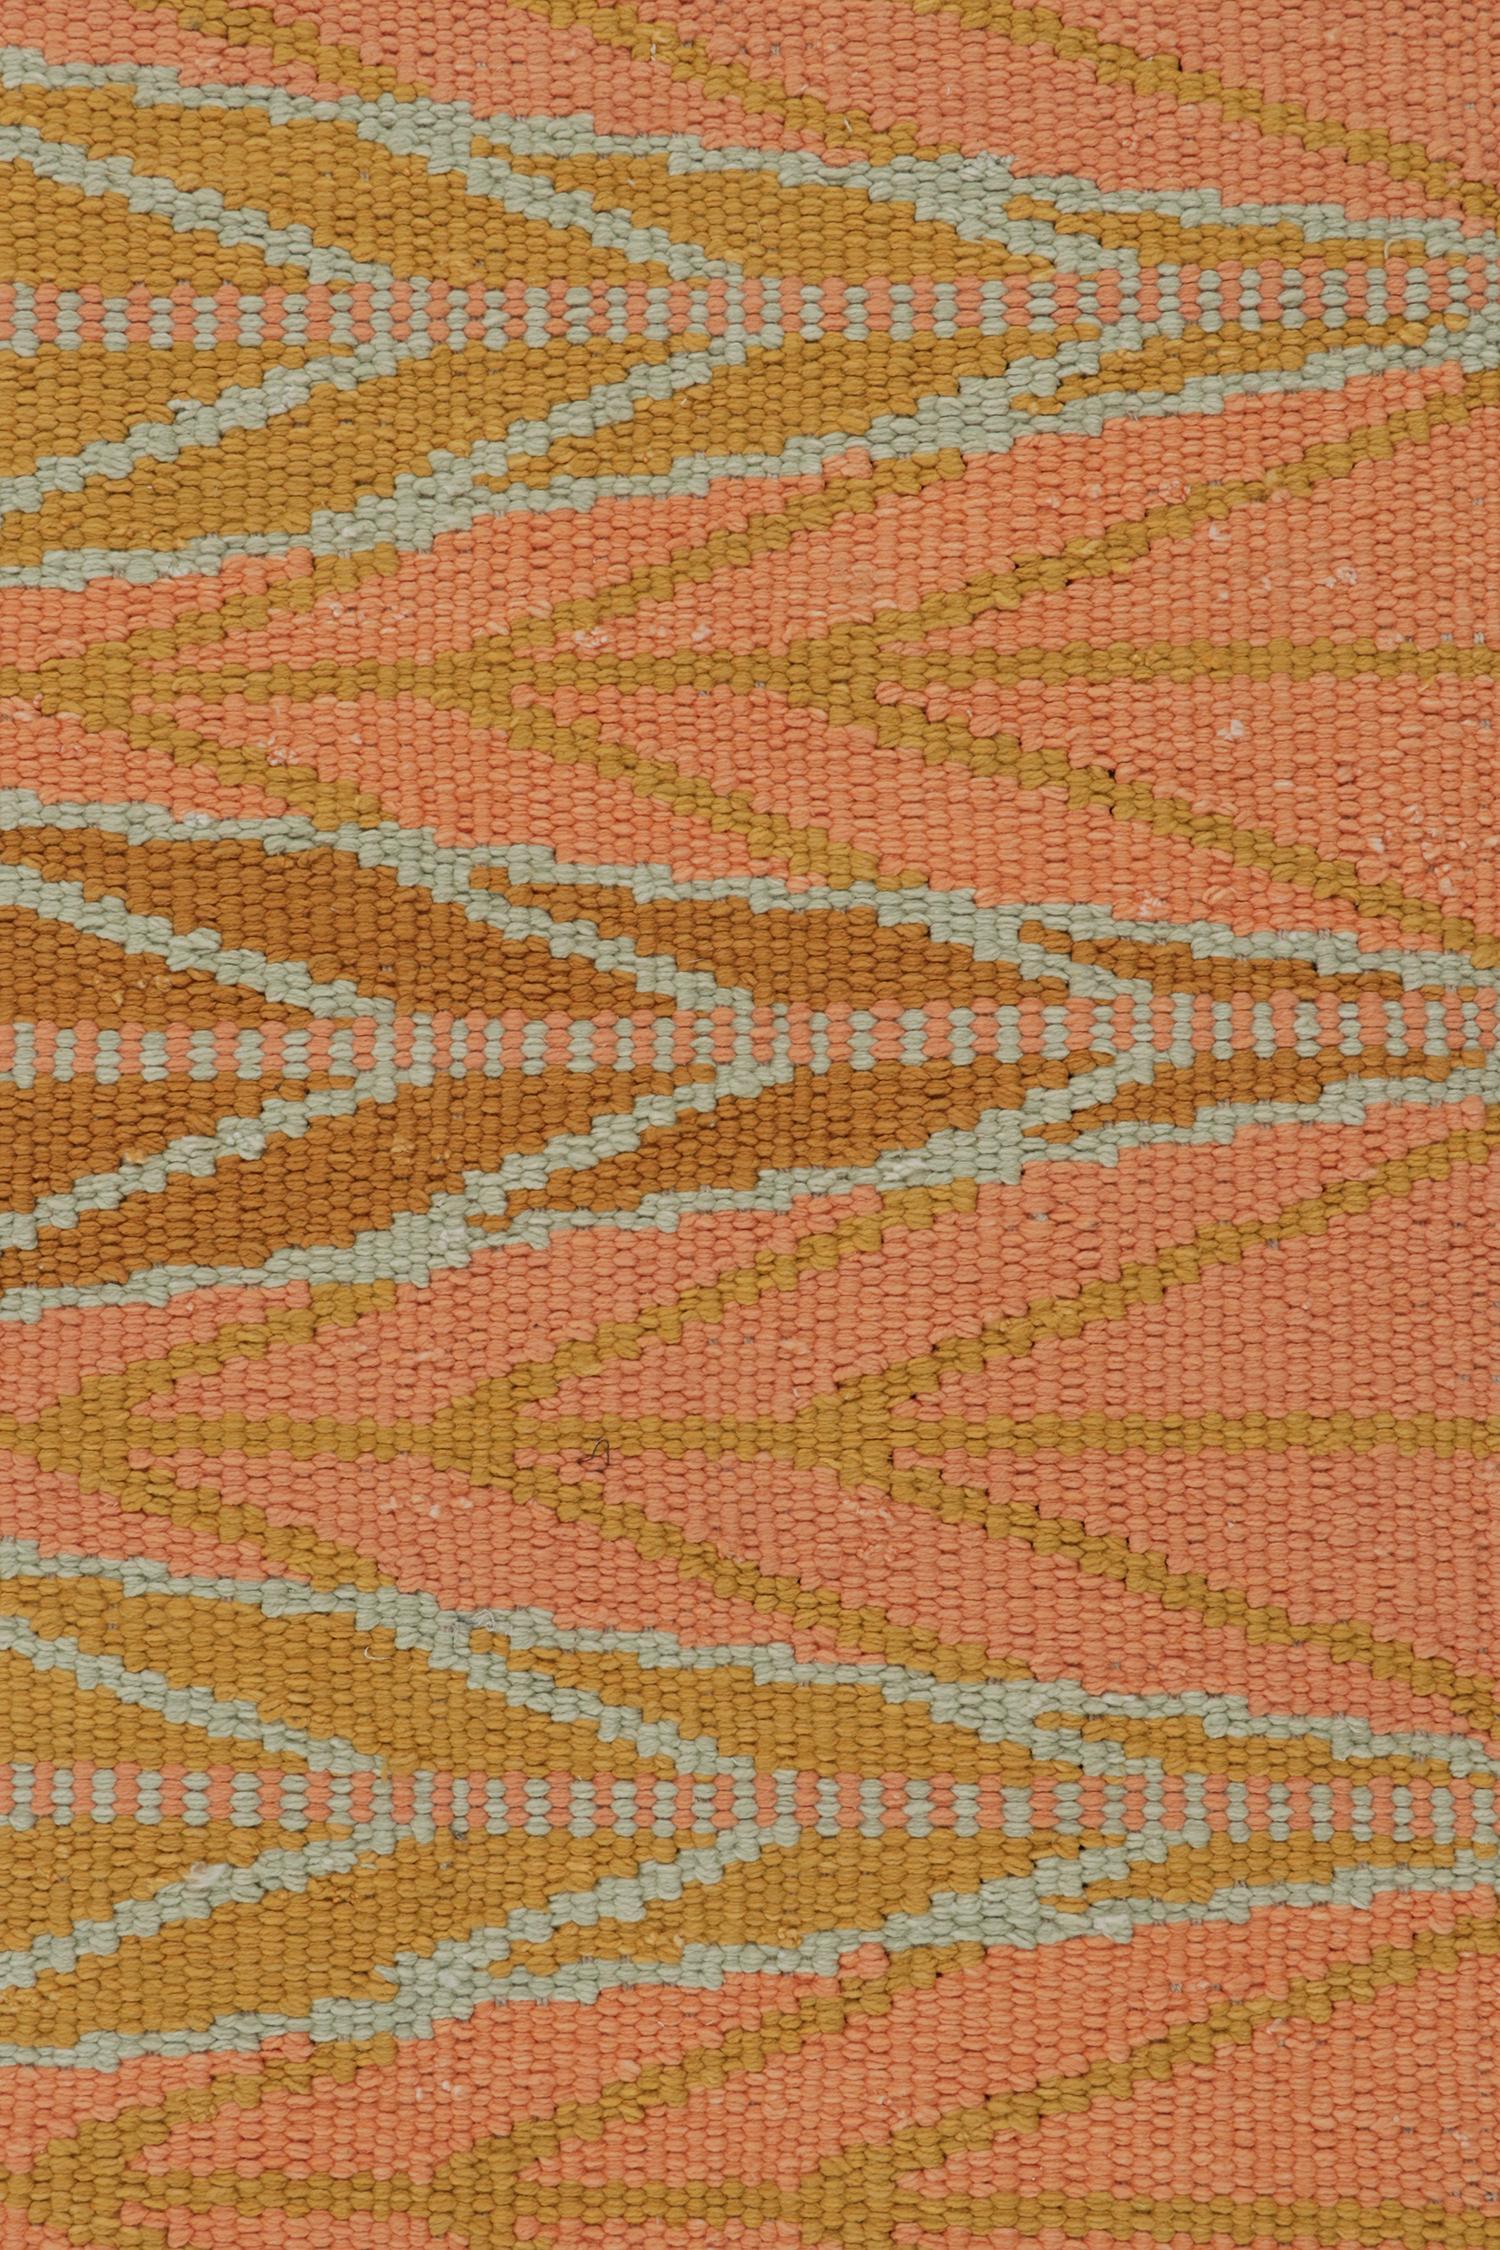 Rug & Kilim’s Scandinavian Style Kilim in Orange, Gold & Blue Geometric Pattern In New Condition For Sale In Long Island City, NY